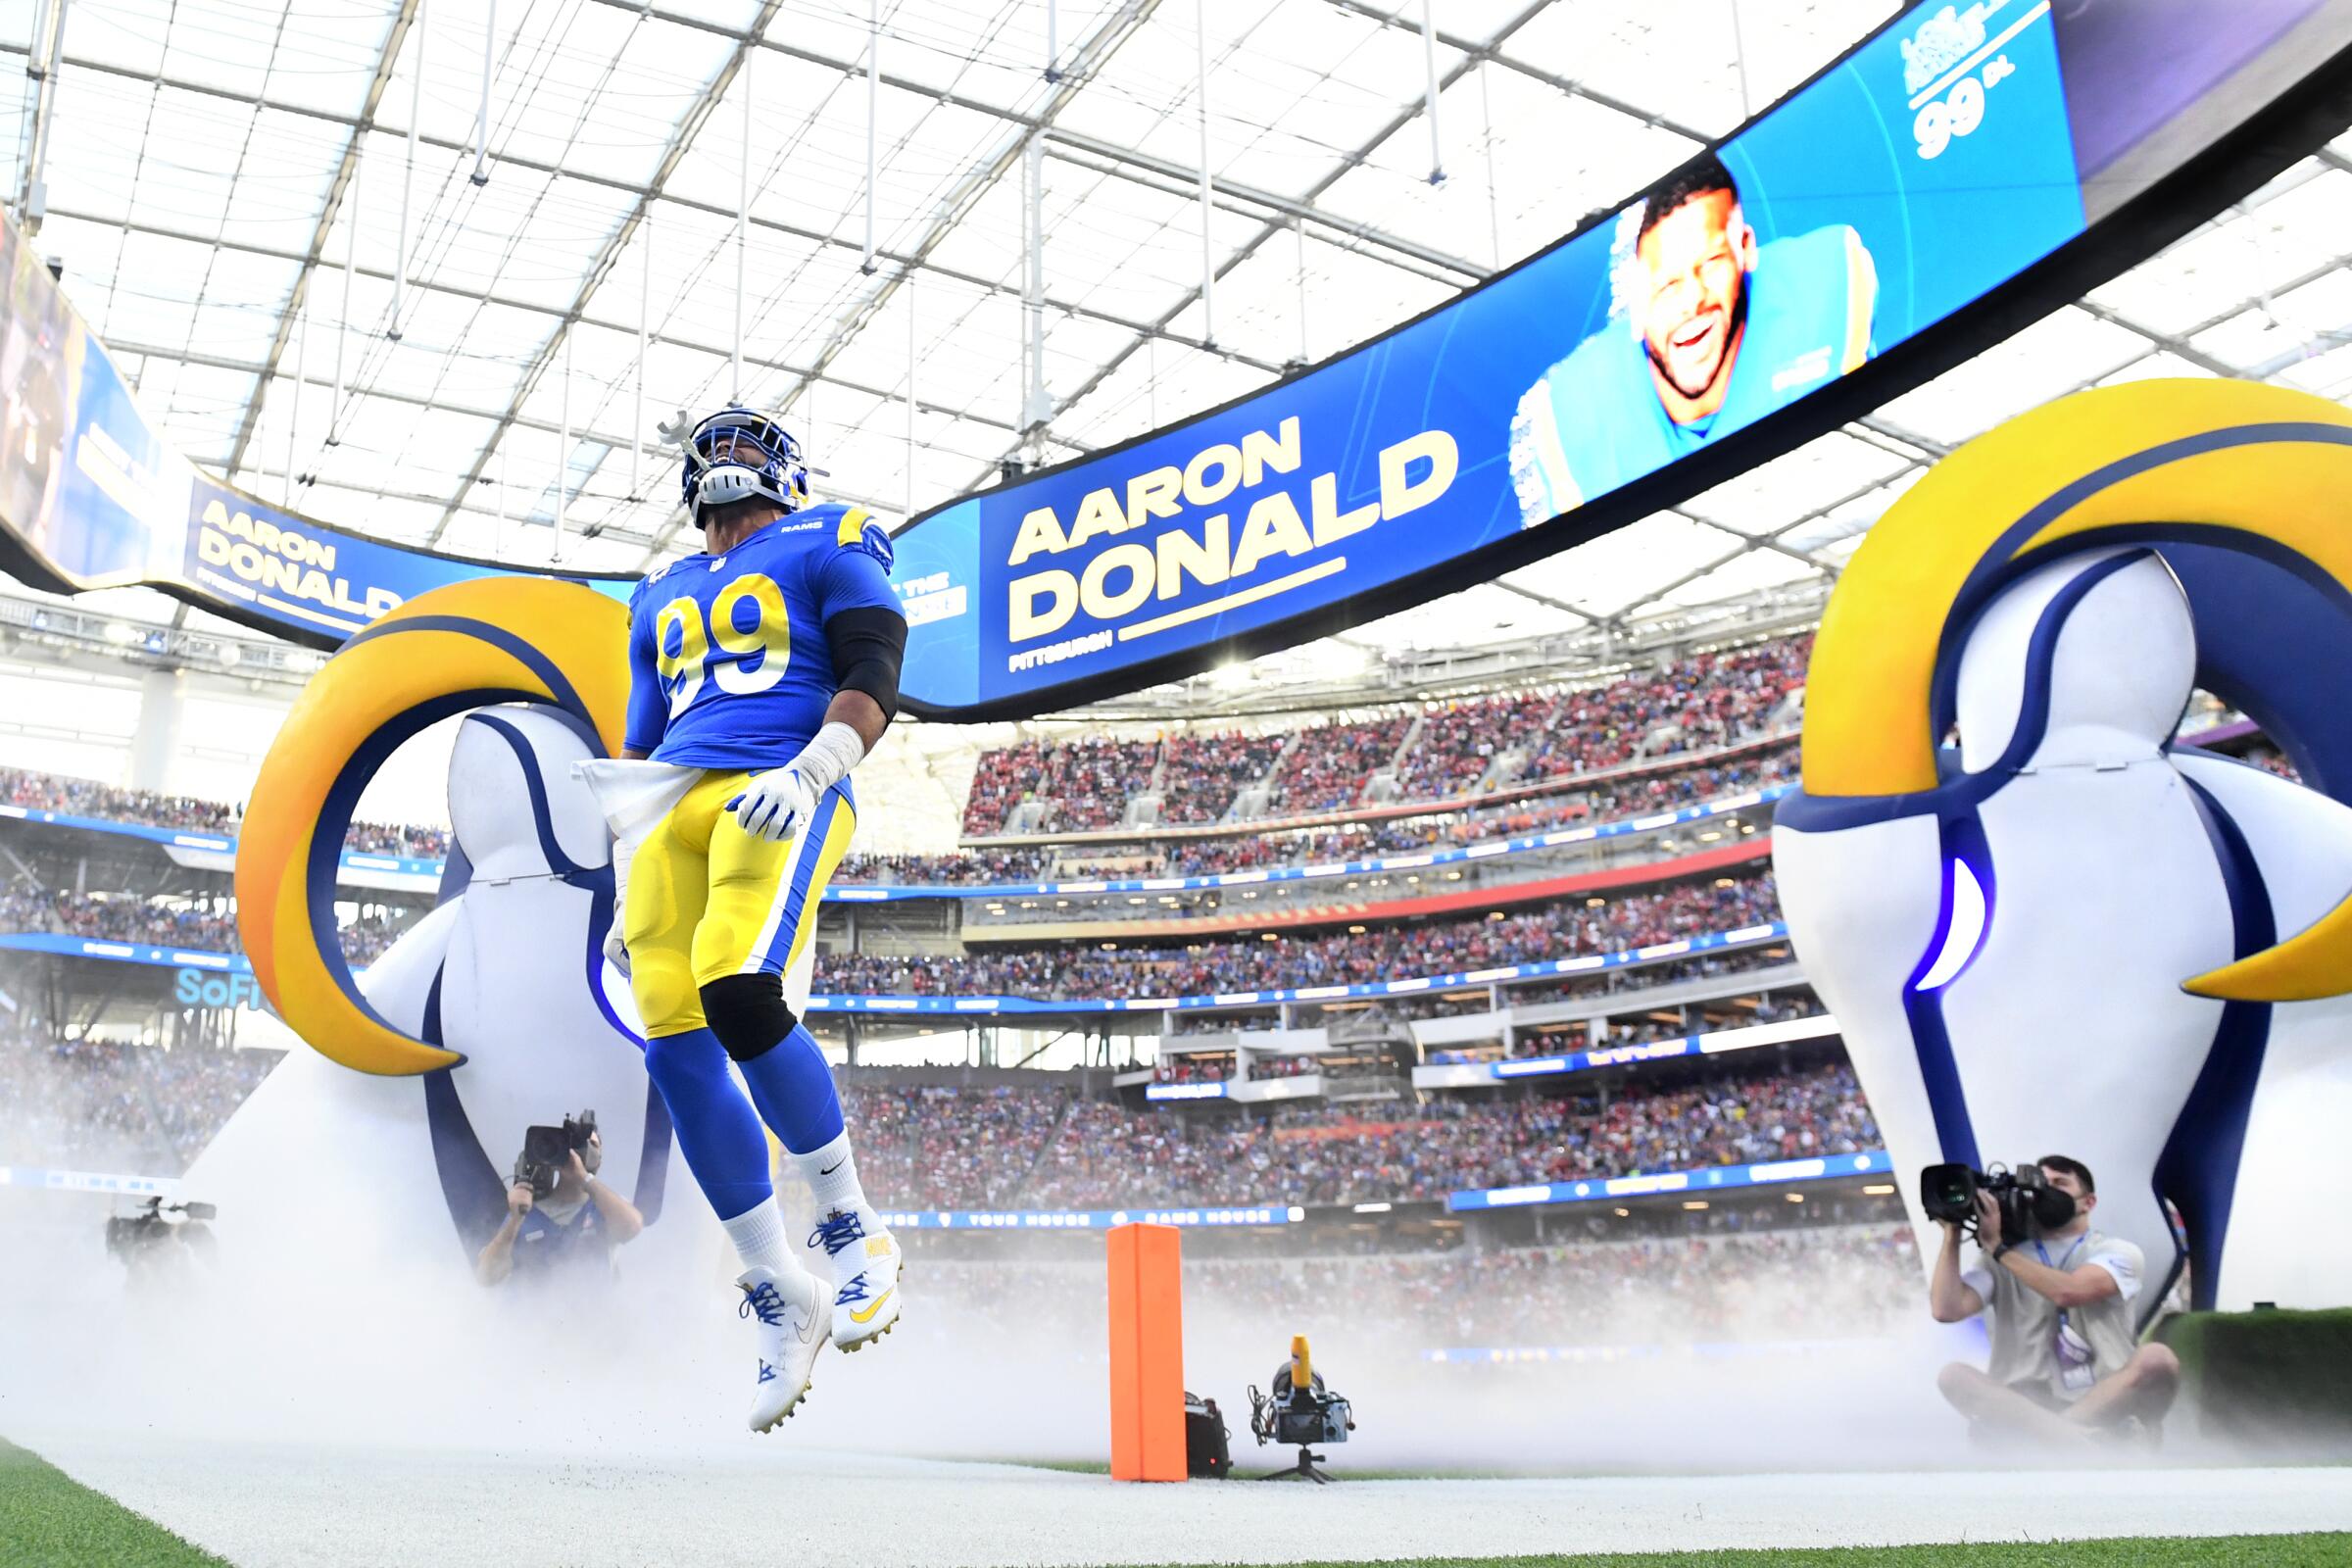 Rams defensive lineman Aaron Donald is introduced before a game.